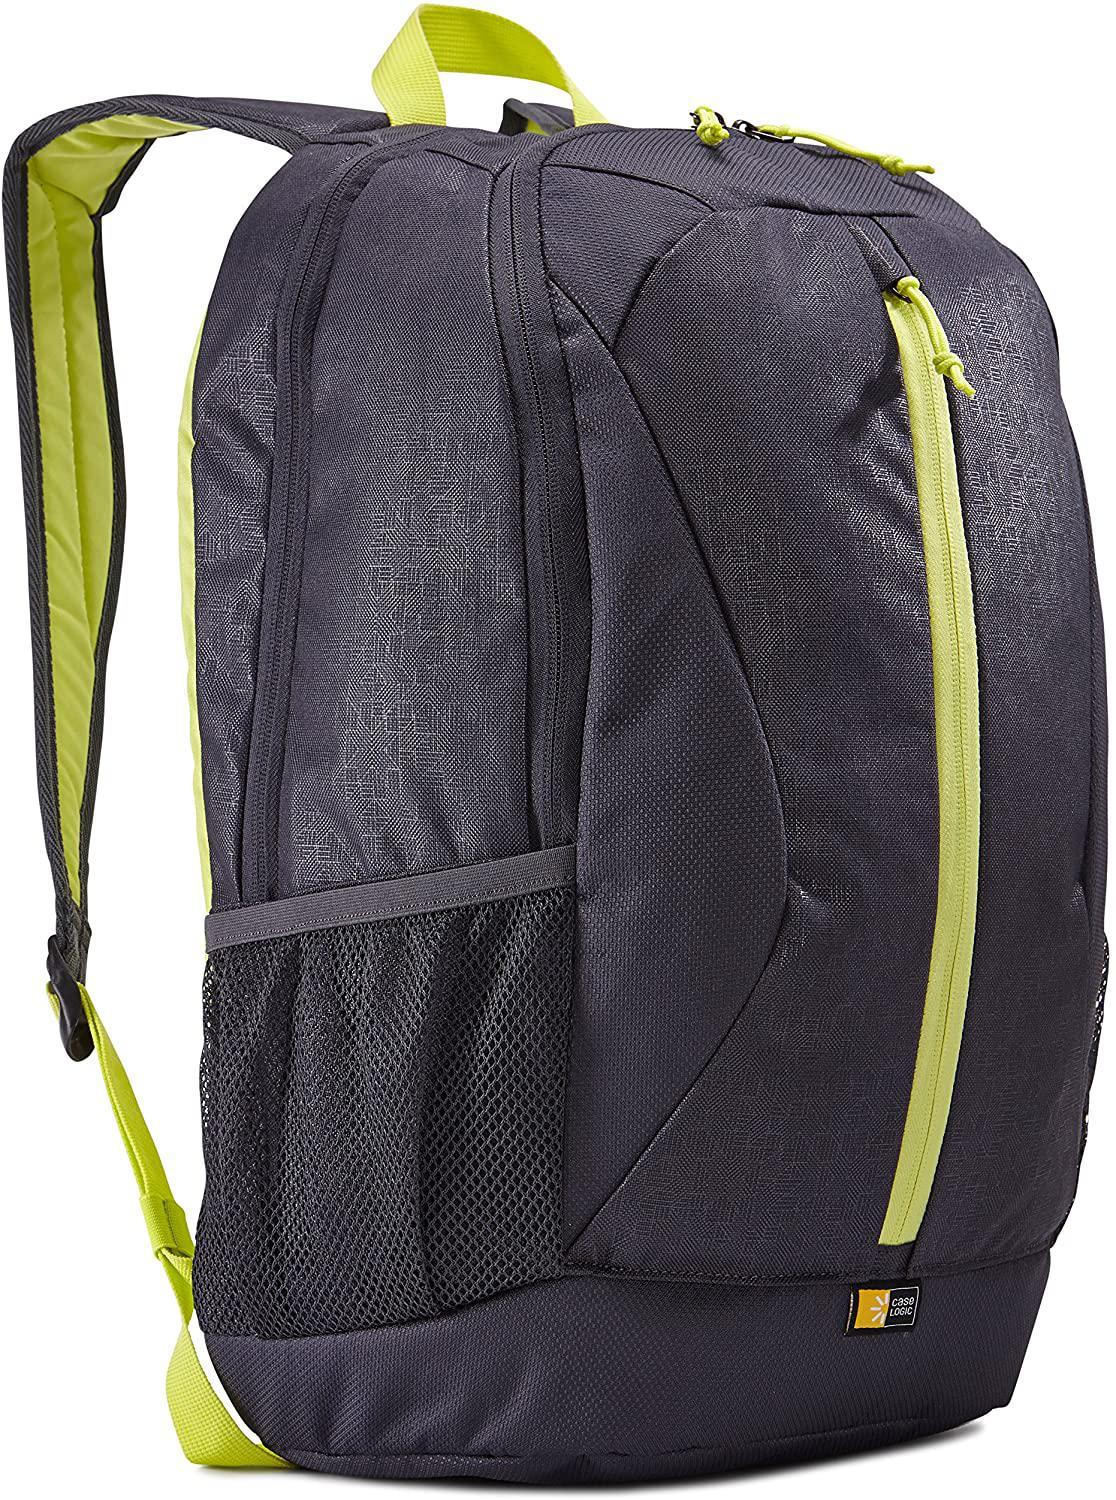 CASE LOGIC IBIRA BACKPACK IBIR-115 for School, Travel & Business (Up to 15.6 inch and 24L)